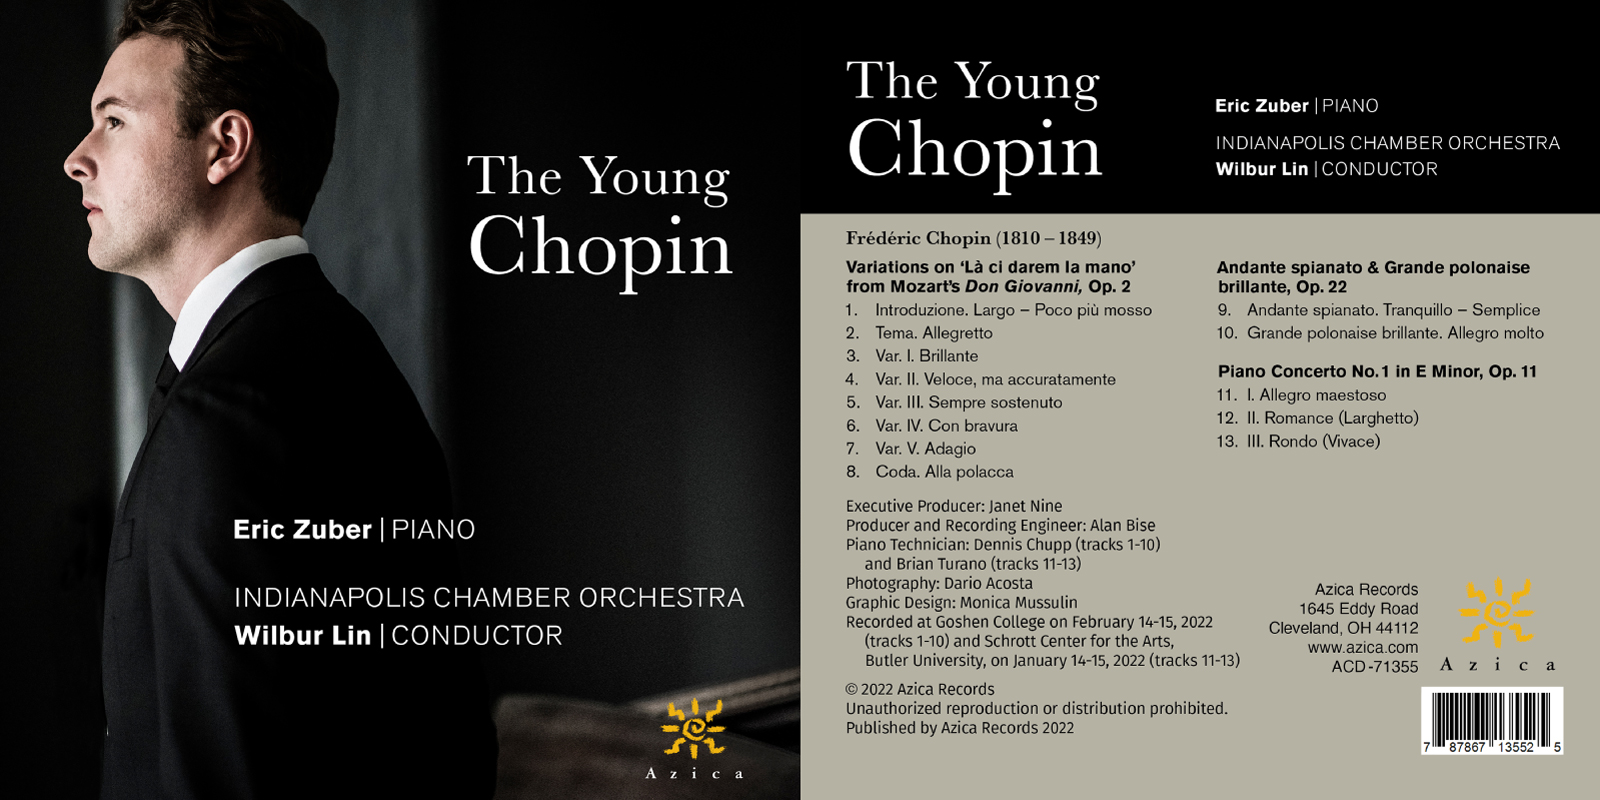 Eric Zuber's The Young Chopin album cover